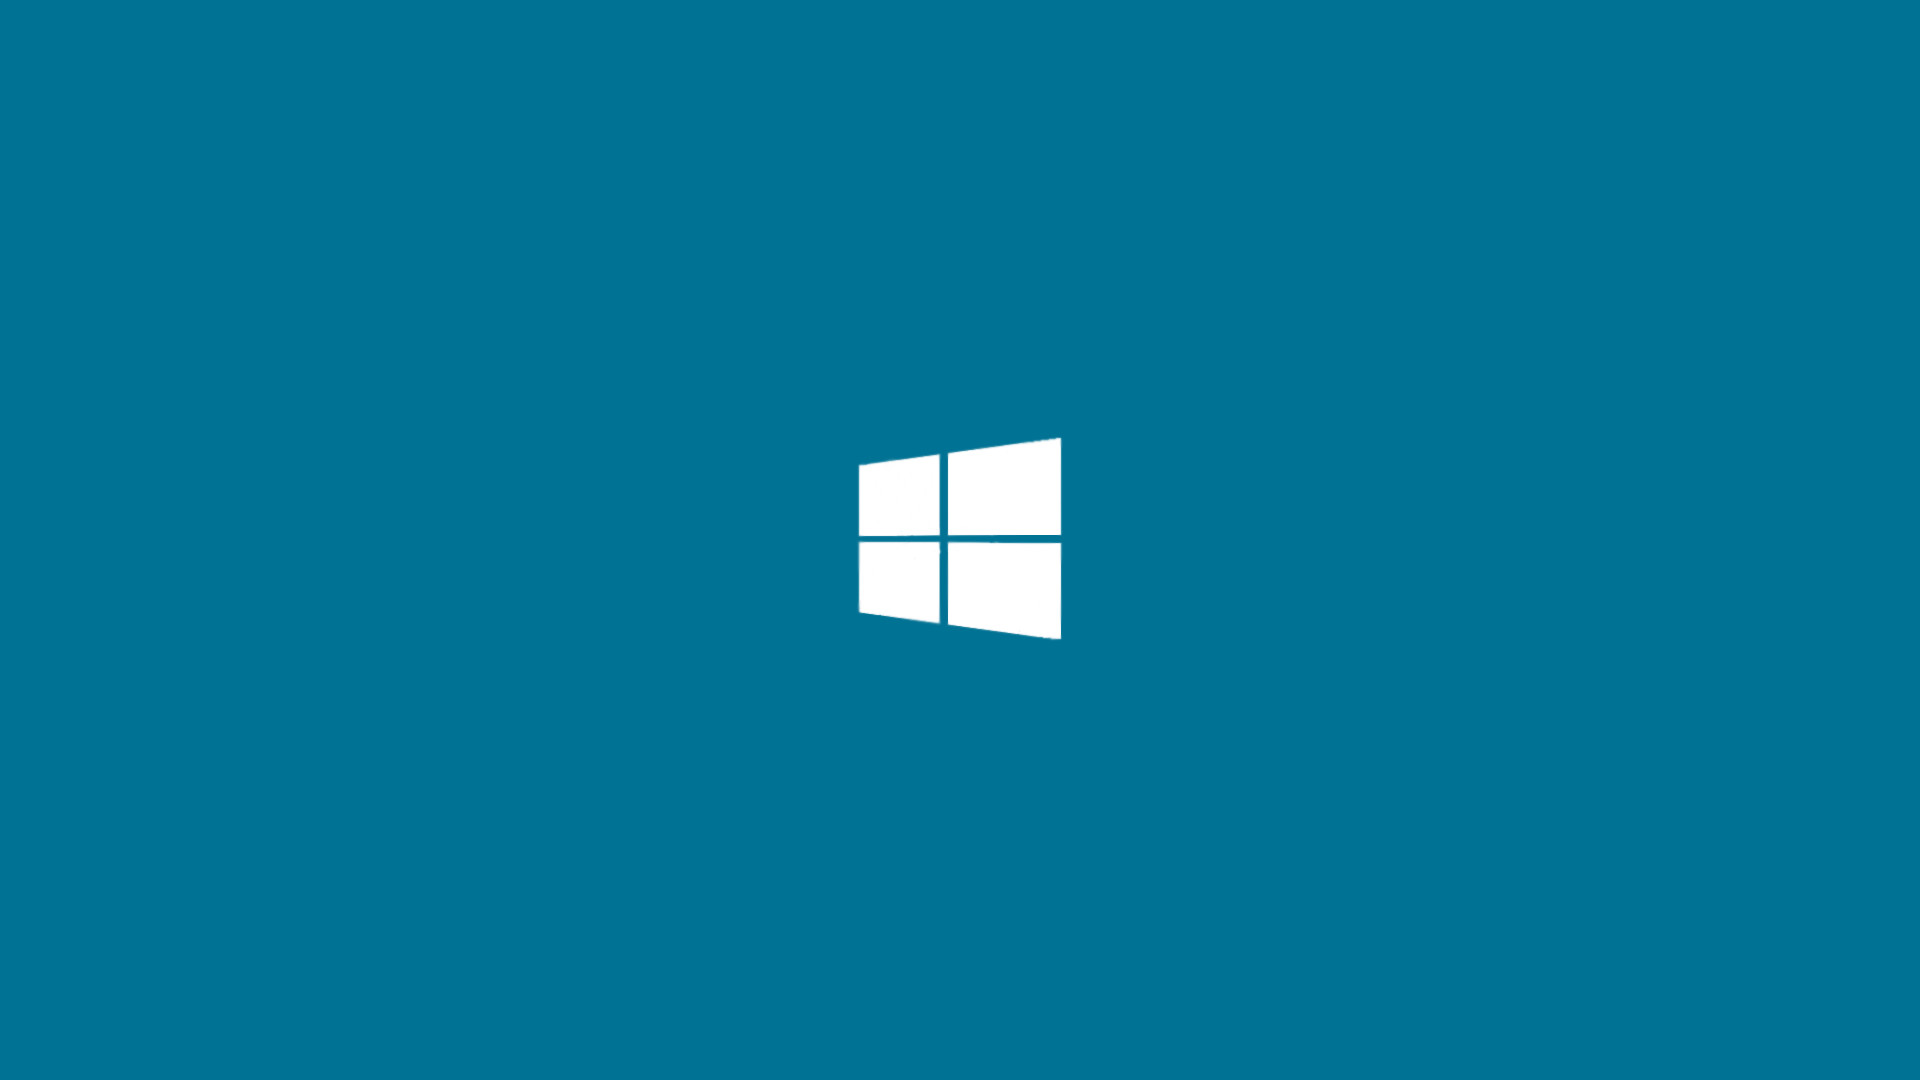 1920x1080 View topic - Windows 8 Photoshop Wallpapers (Updated) - BetaArchive